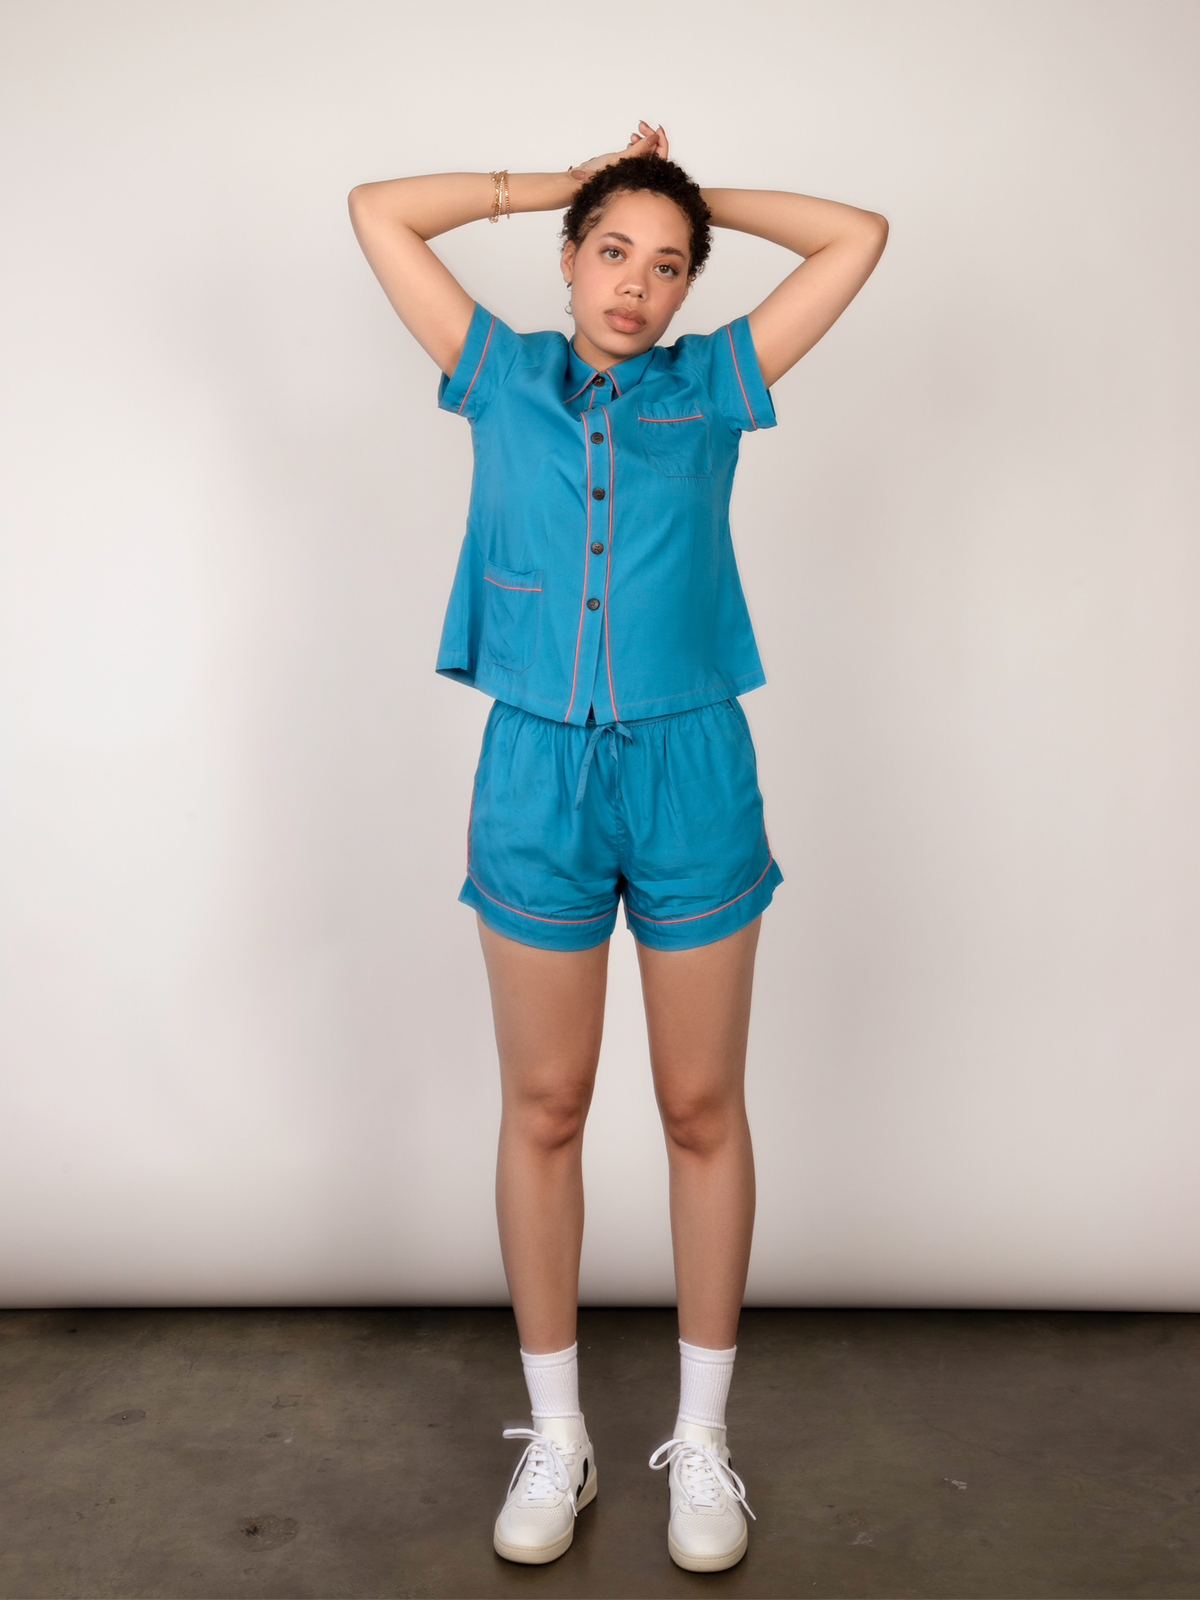 Woman stretches and poses wearing a blue short-sleeve pajama set.